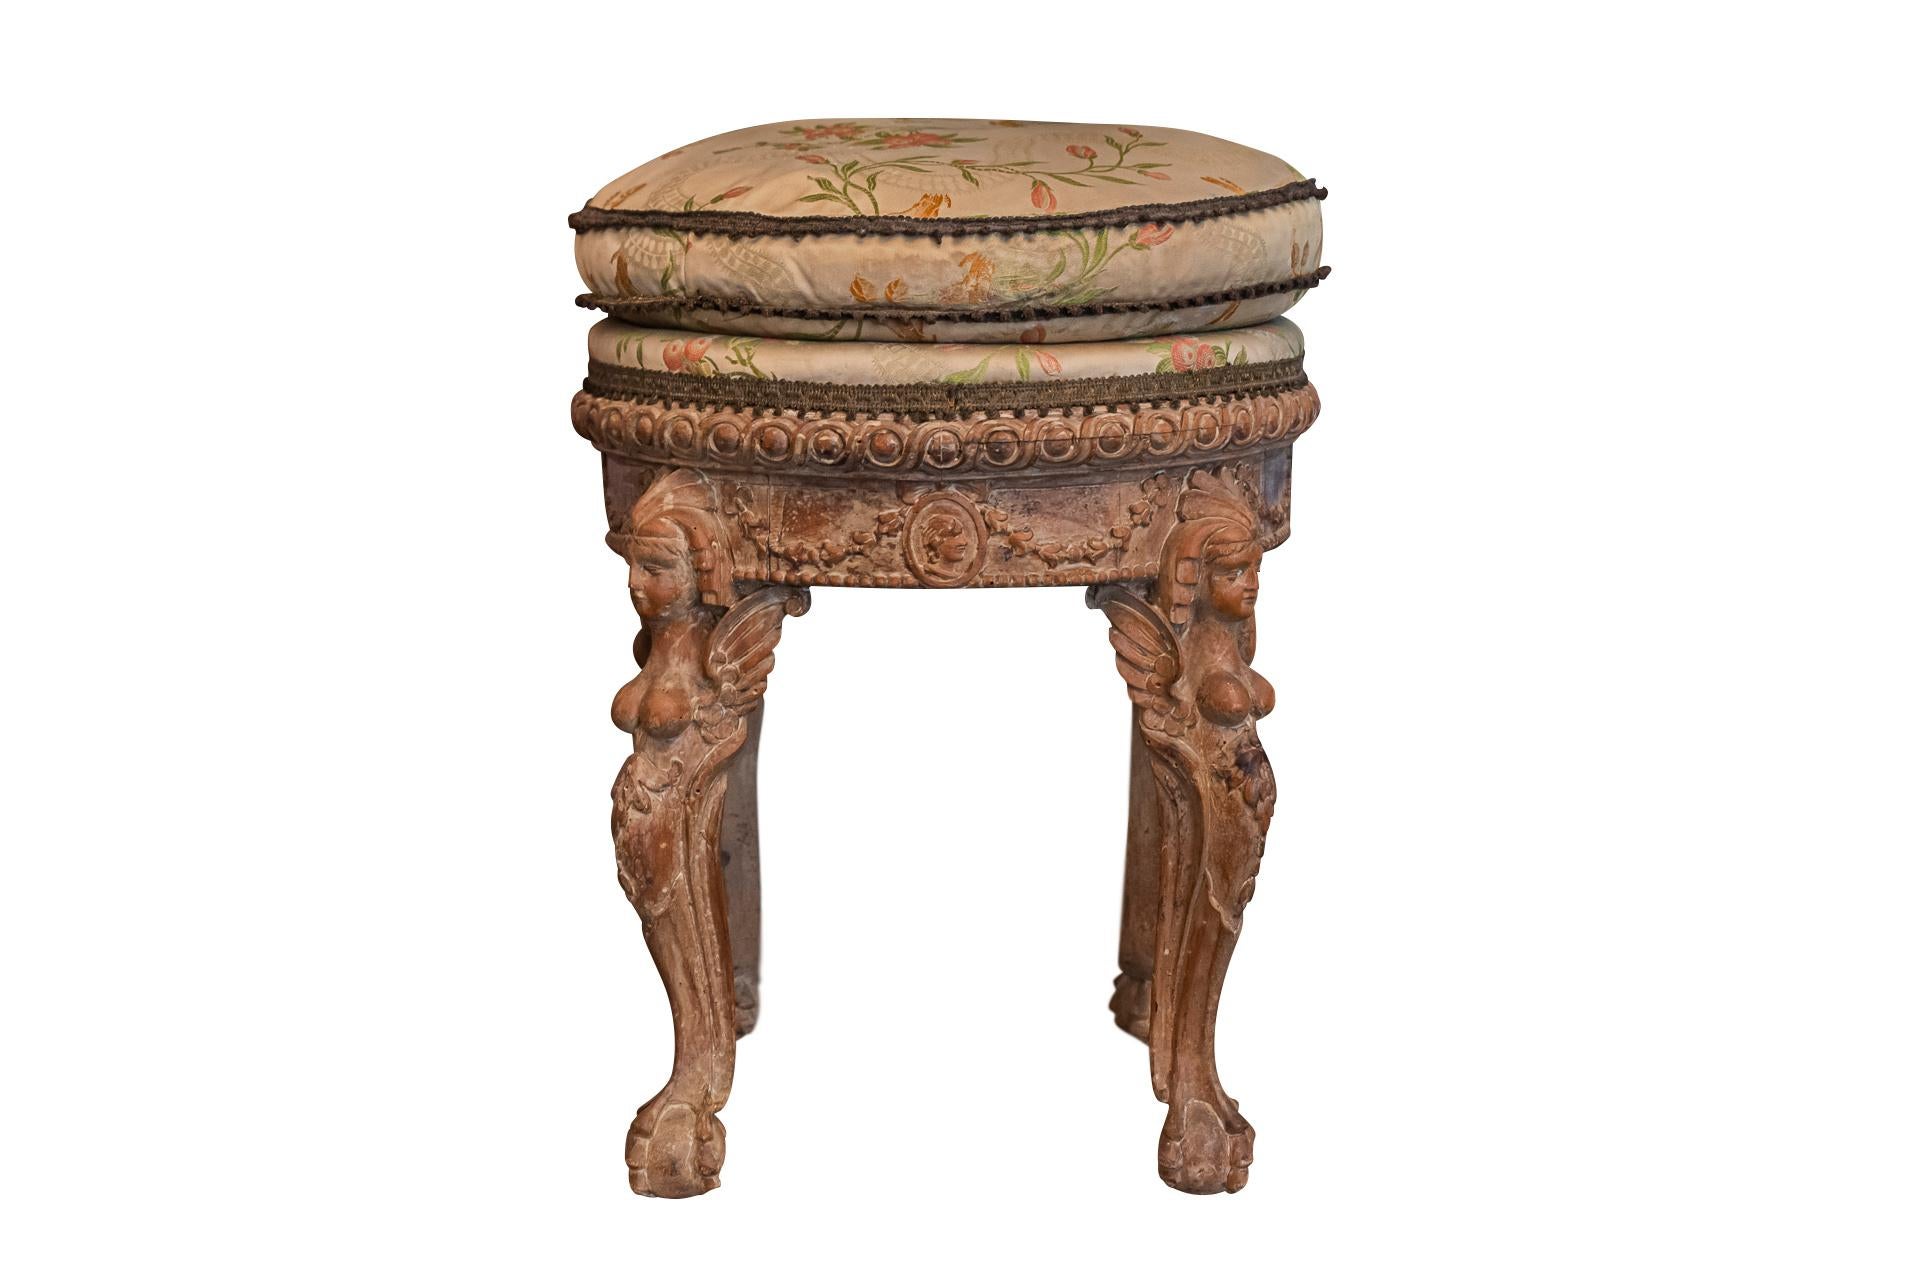 Pair of round stools,
Carved wood decorated with winged sphinxes, pearl frieze and laurel friezes,
Feet claw and ball,
Trim attached with flower and bird decoration,
Late 18th century, France. 

Measures : Diameter 43 cm, height 51 cm.